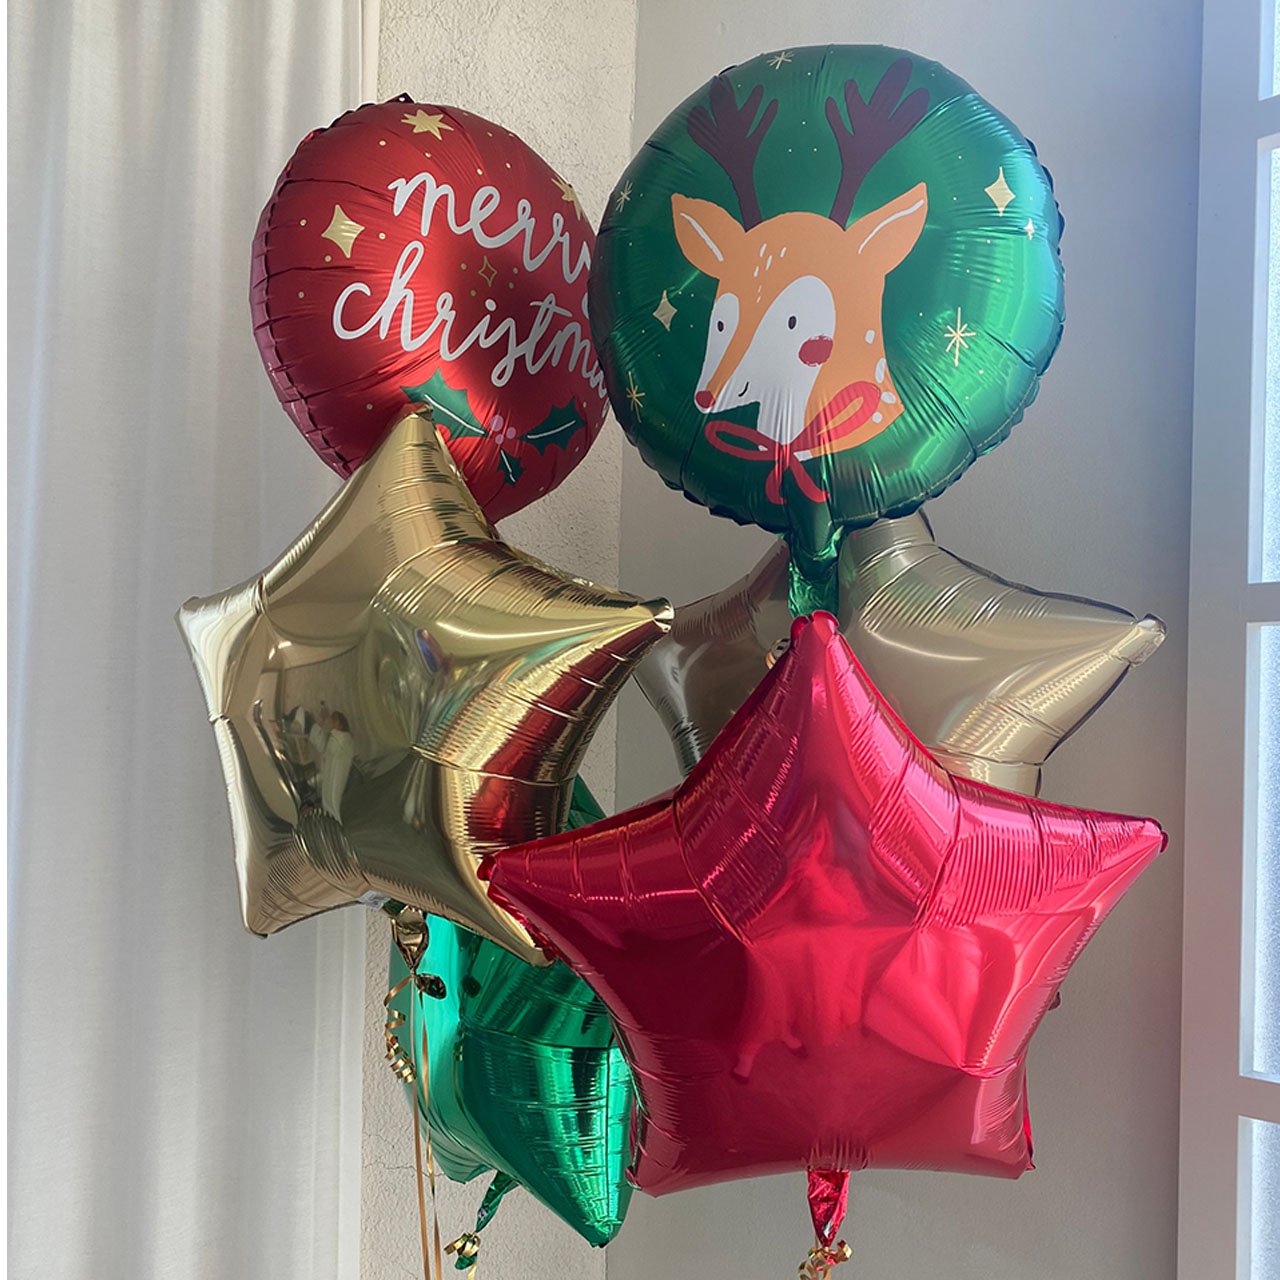 <img class='new_mark_img1' src='https://img.shop-pro.jp/img/new/icons23.gif' style='border:none;display:inline;margin:0px;padding:0px;width:auto;' />Xmas Holy Set Float Balloon - Float type - クリスマスバルーン豪華セットヘリウムバルーンギフト